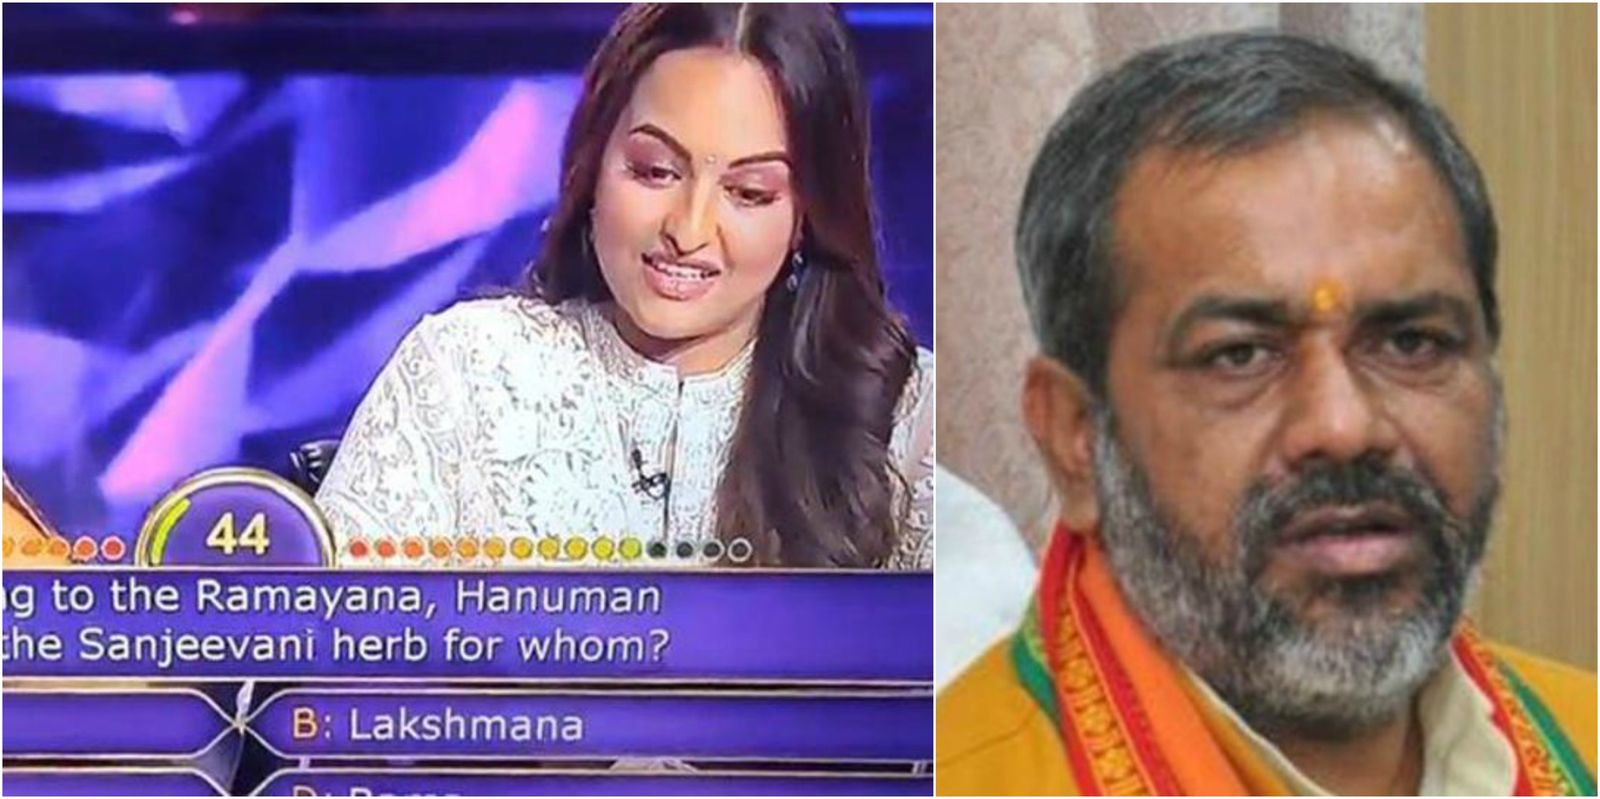  UP Minister Calls Sonakshi Sinha A ‘Dhan Pashu’ For Not Knowing The Answer To A Question Related To Ramayana On KBC